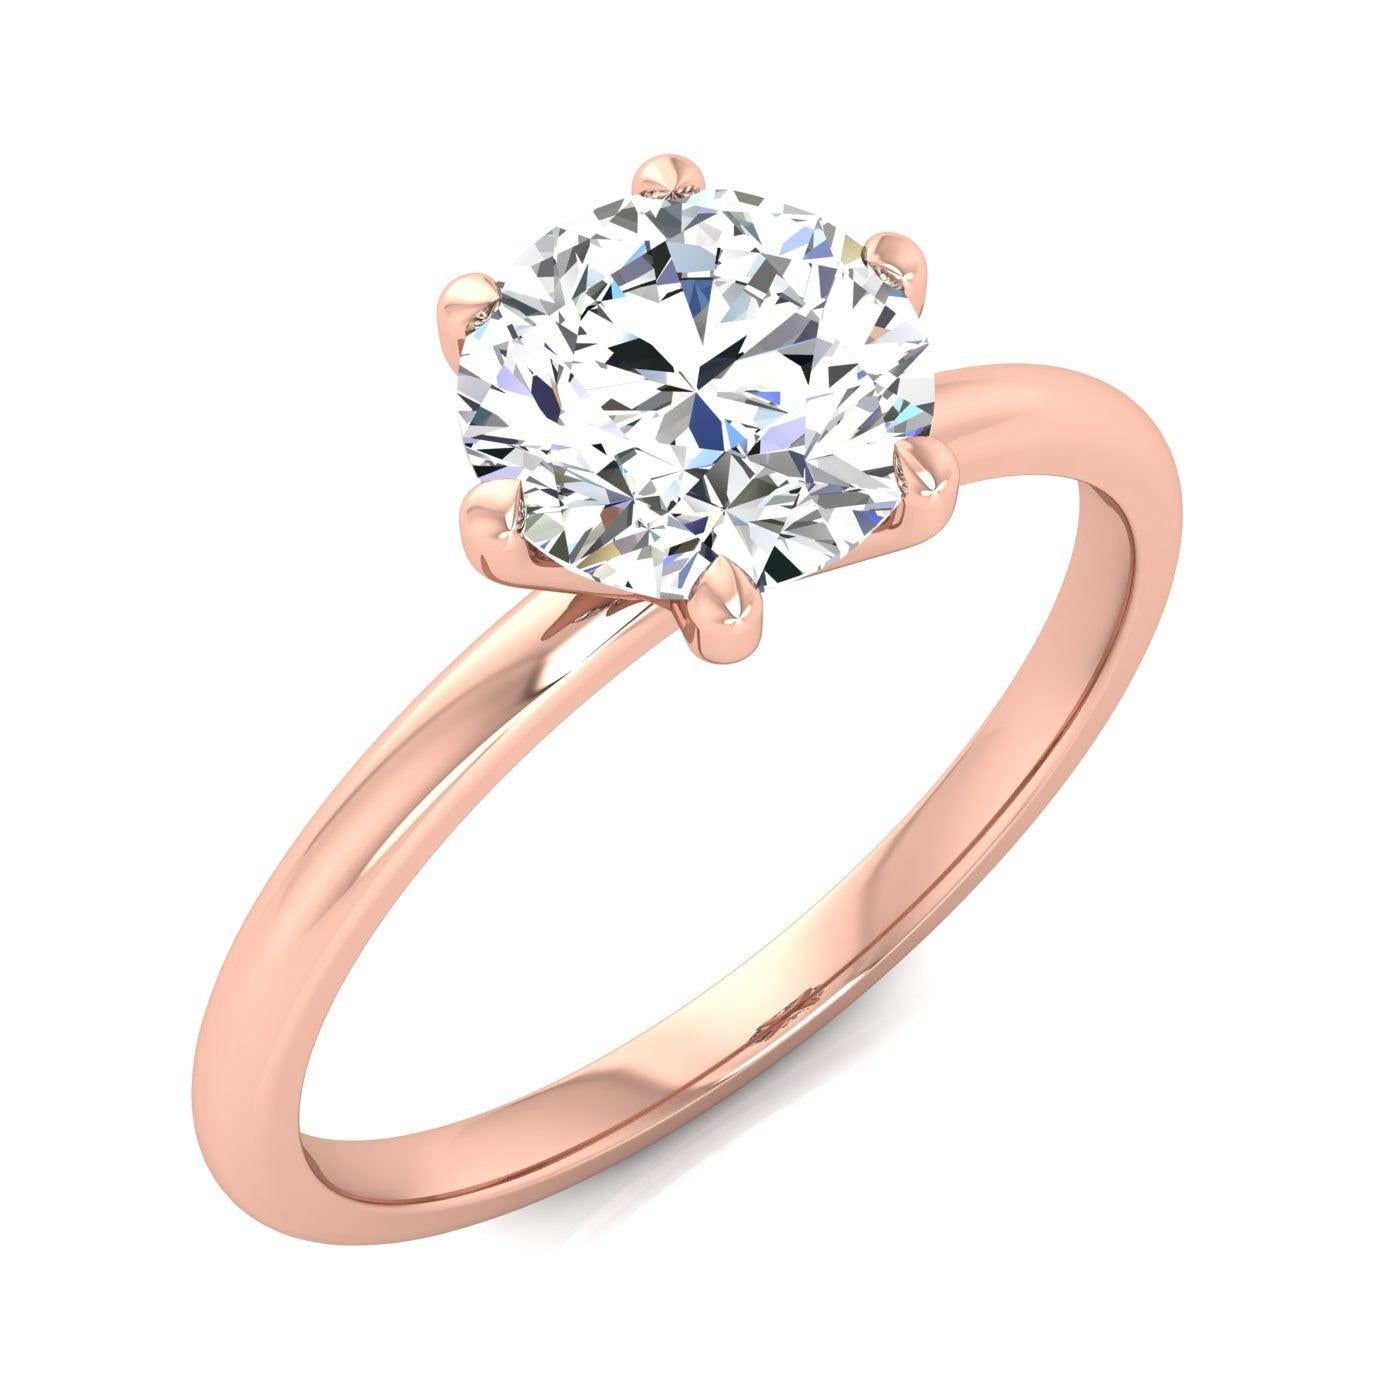 For Sale:  14 Karat Rose Gold Six Prong Solitaire 1 Carat Round Brilliant Diamond I SI2 GIA 4